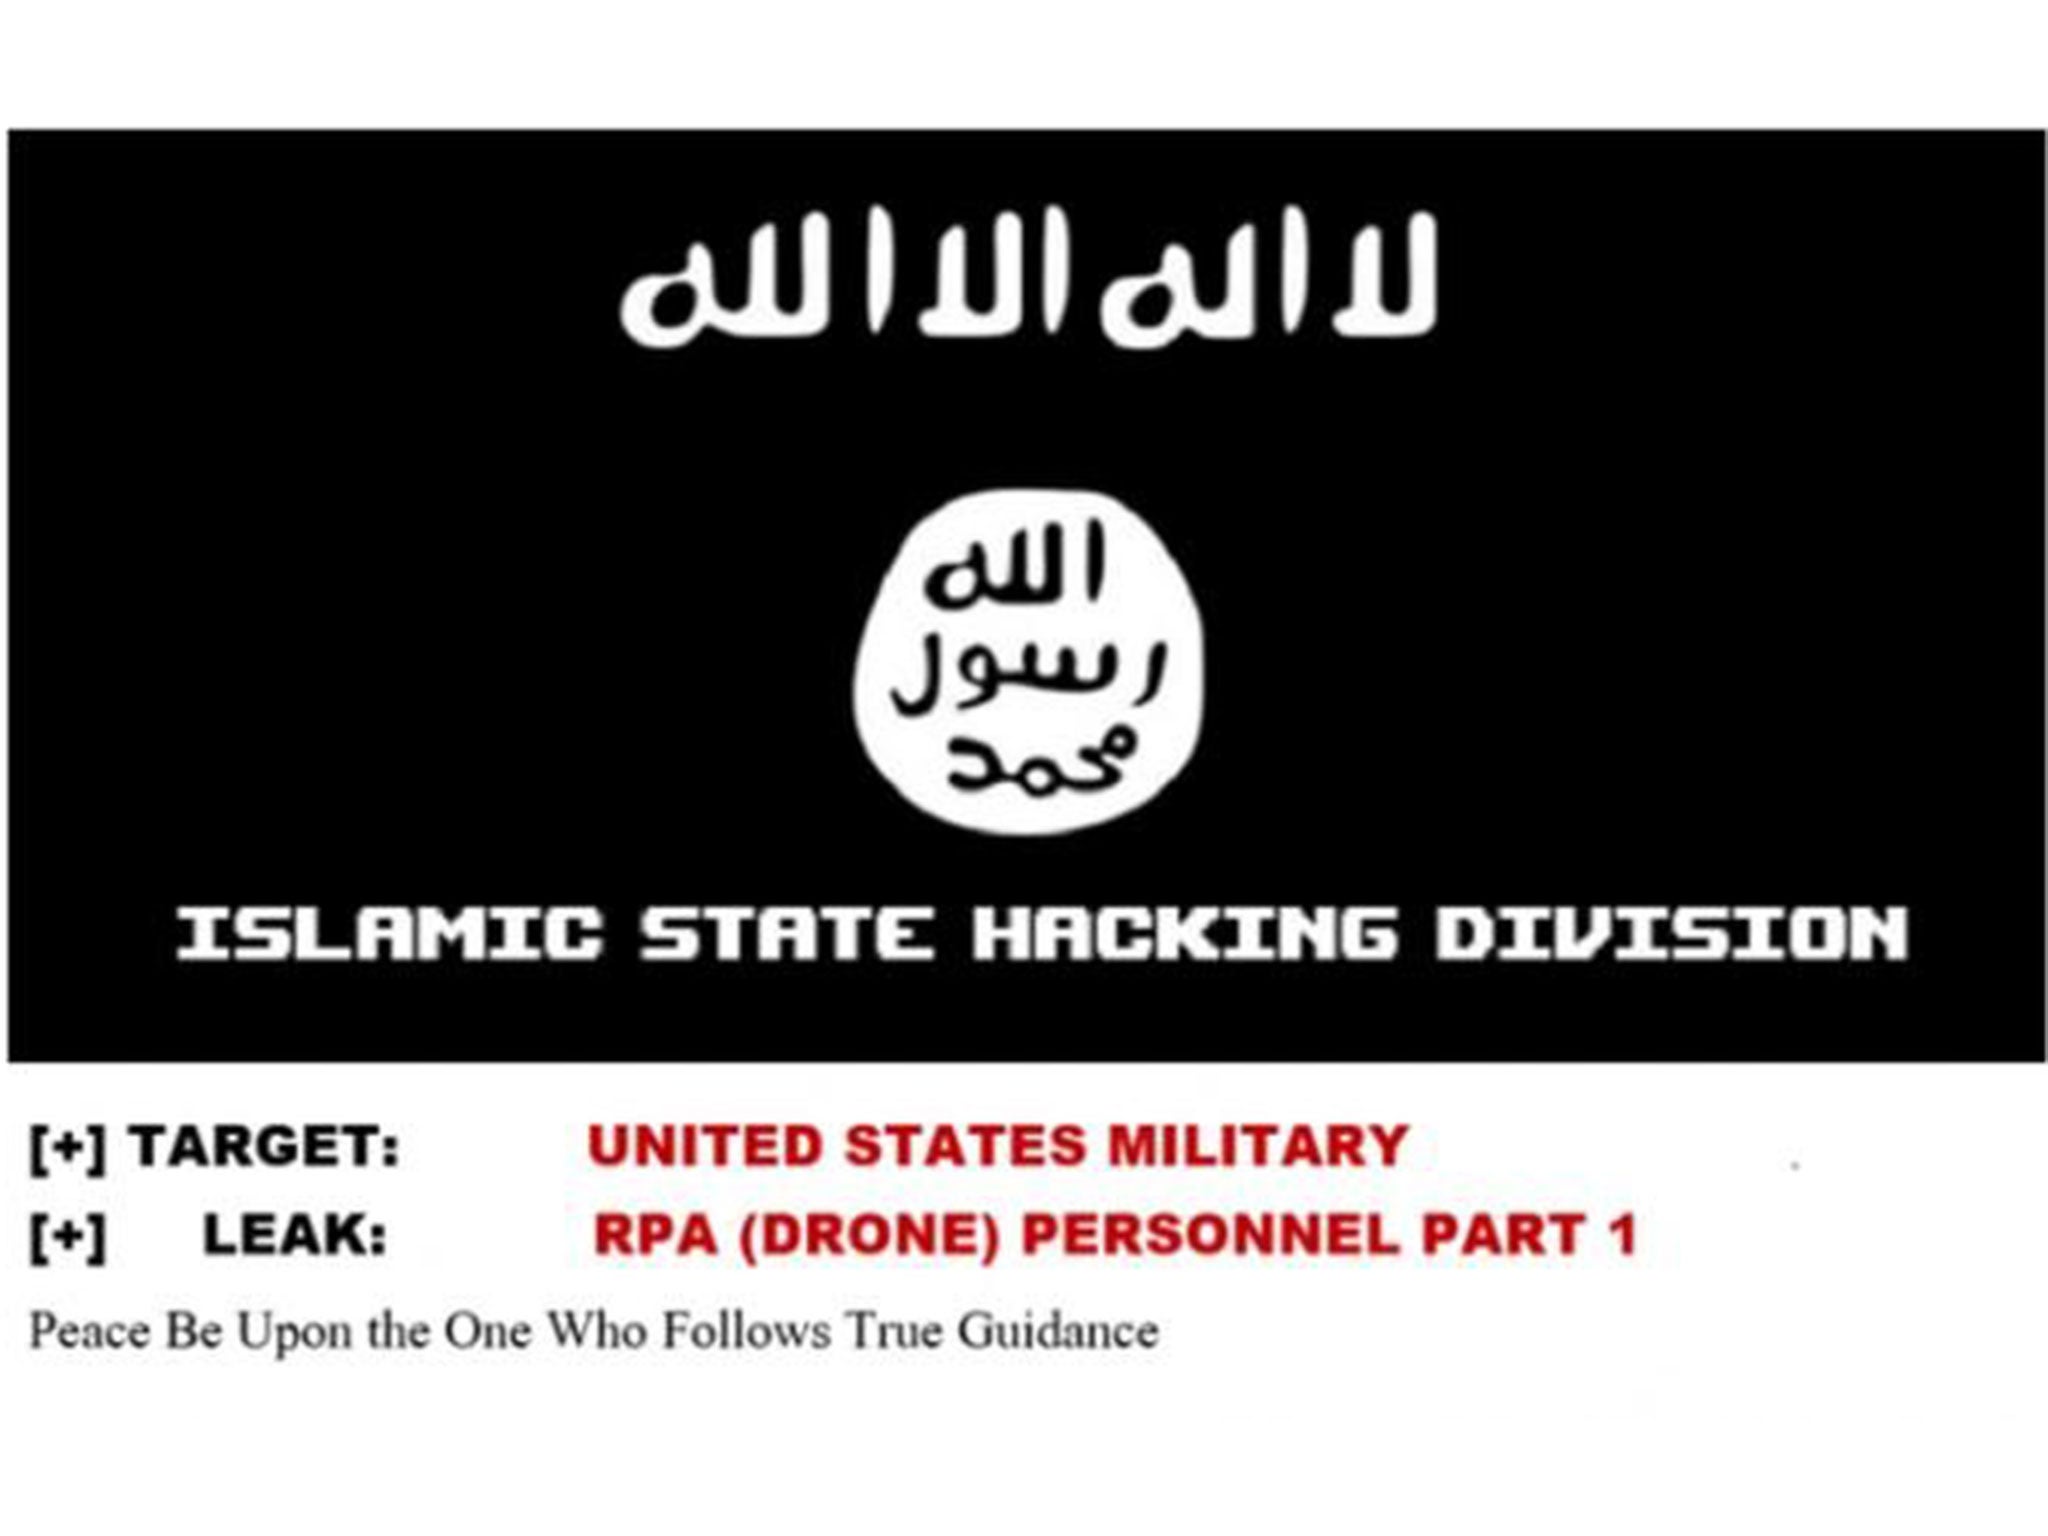 A screen grab of the Isis-linked cyber group's page, on which threats to the UK were made